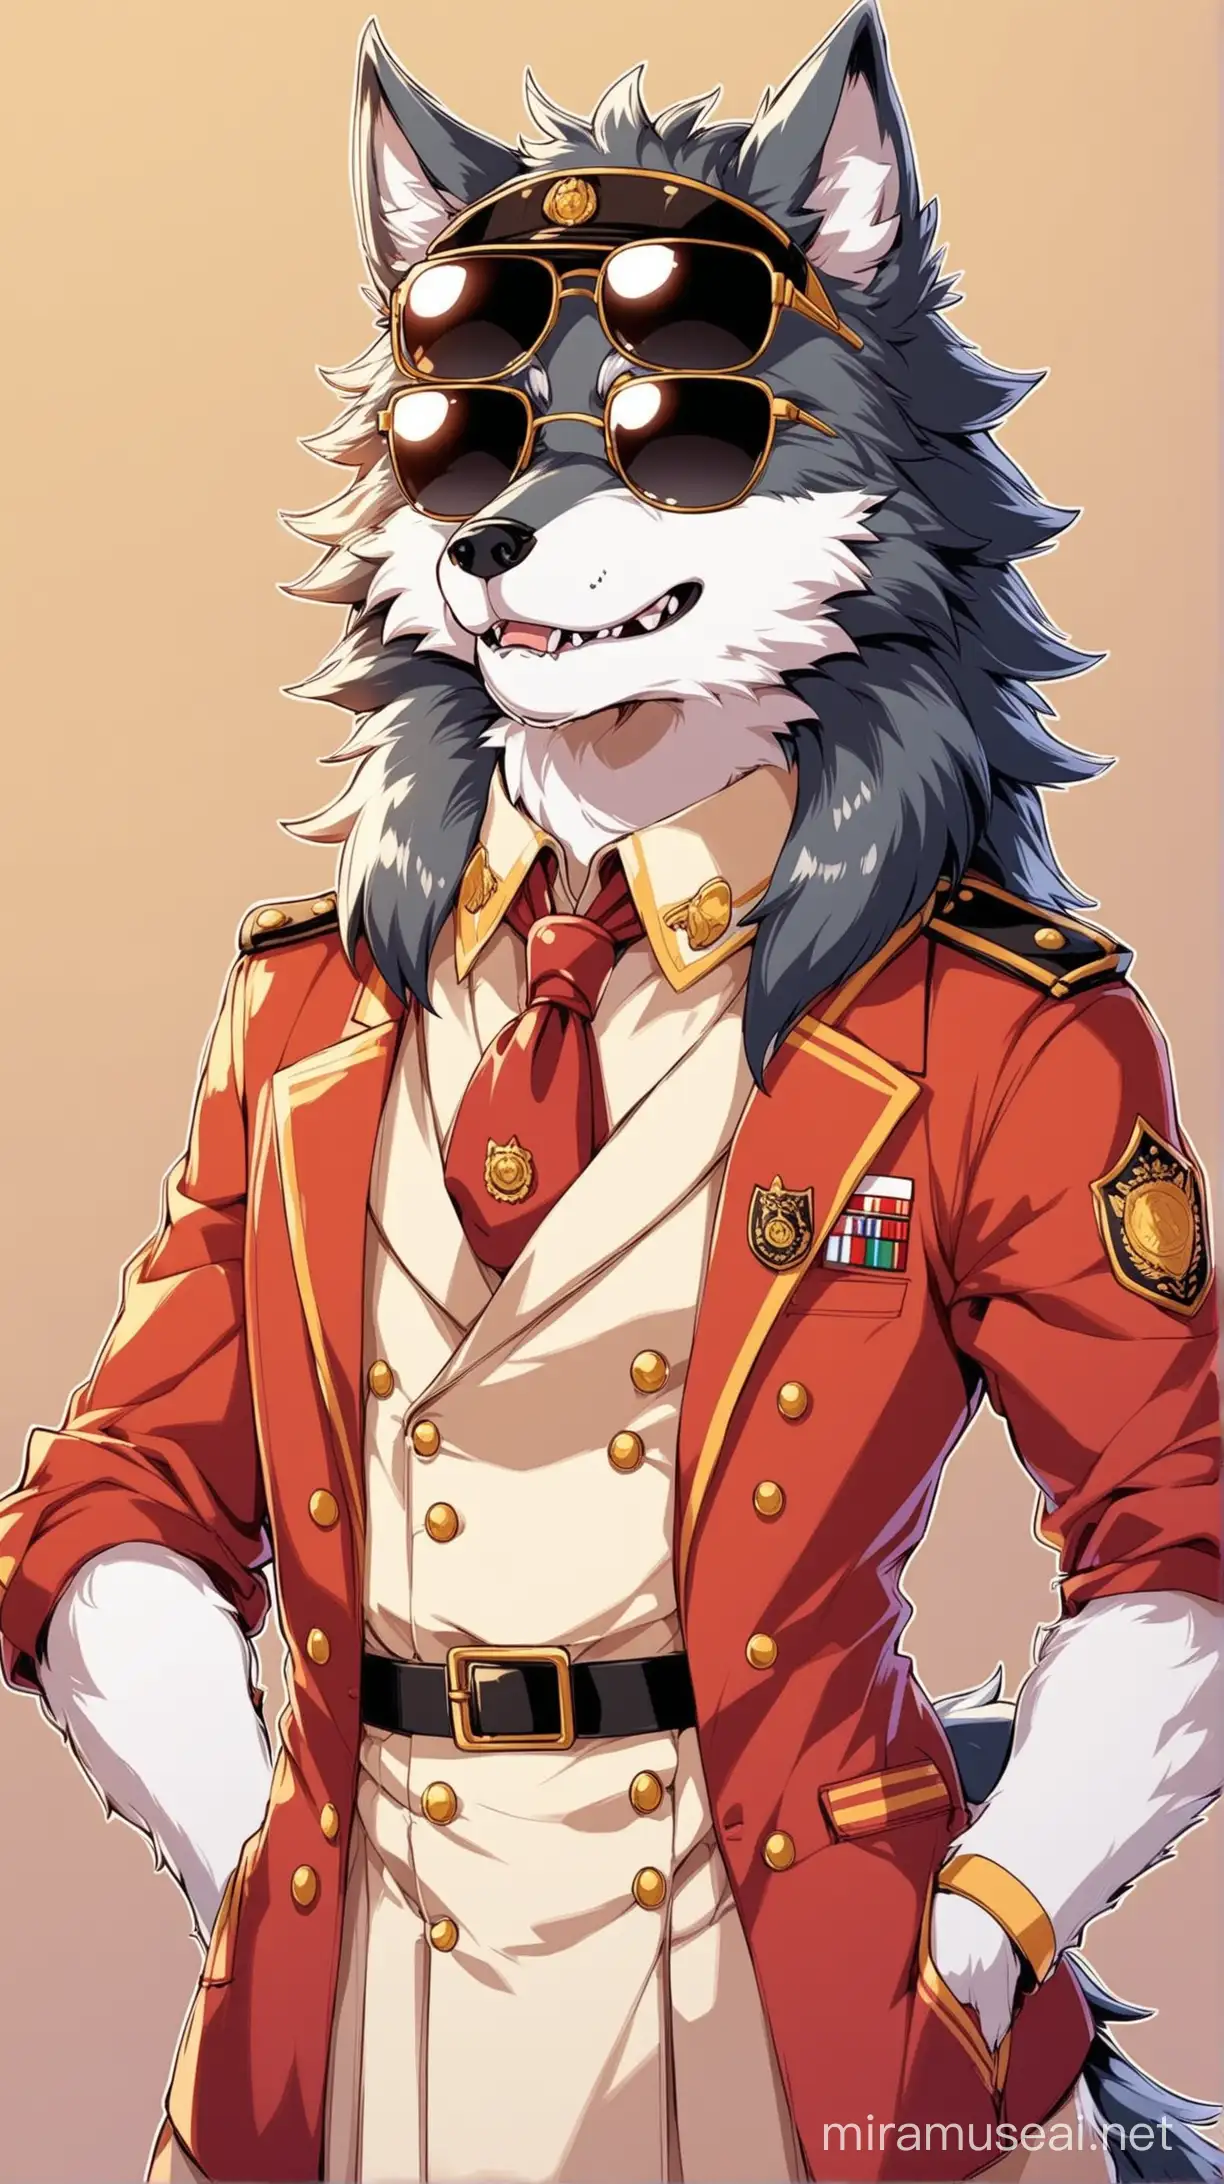 Happy Anime Anthro Wolf in Vintage Sunglasses and Uniform